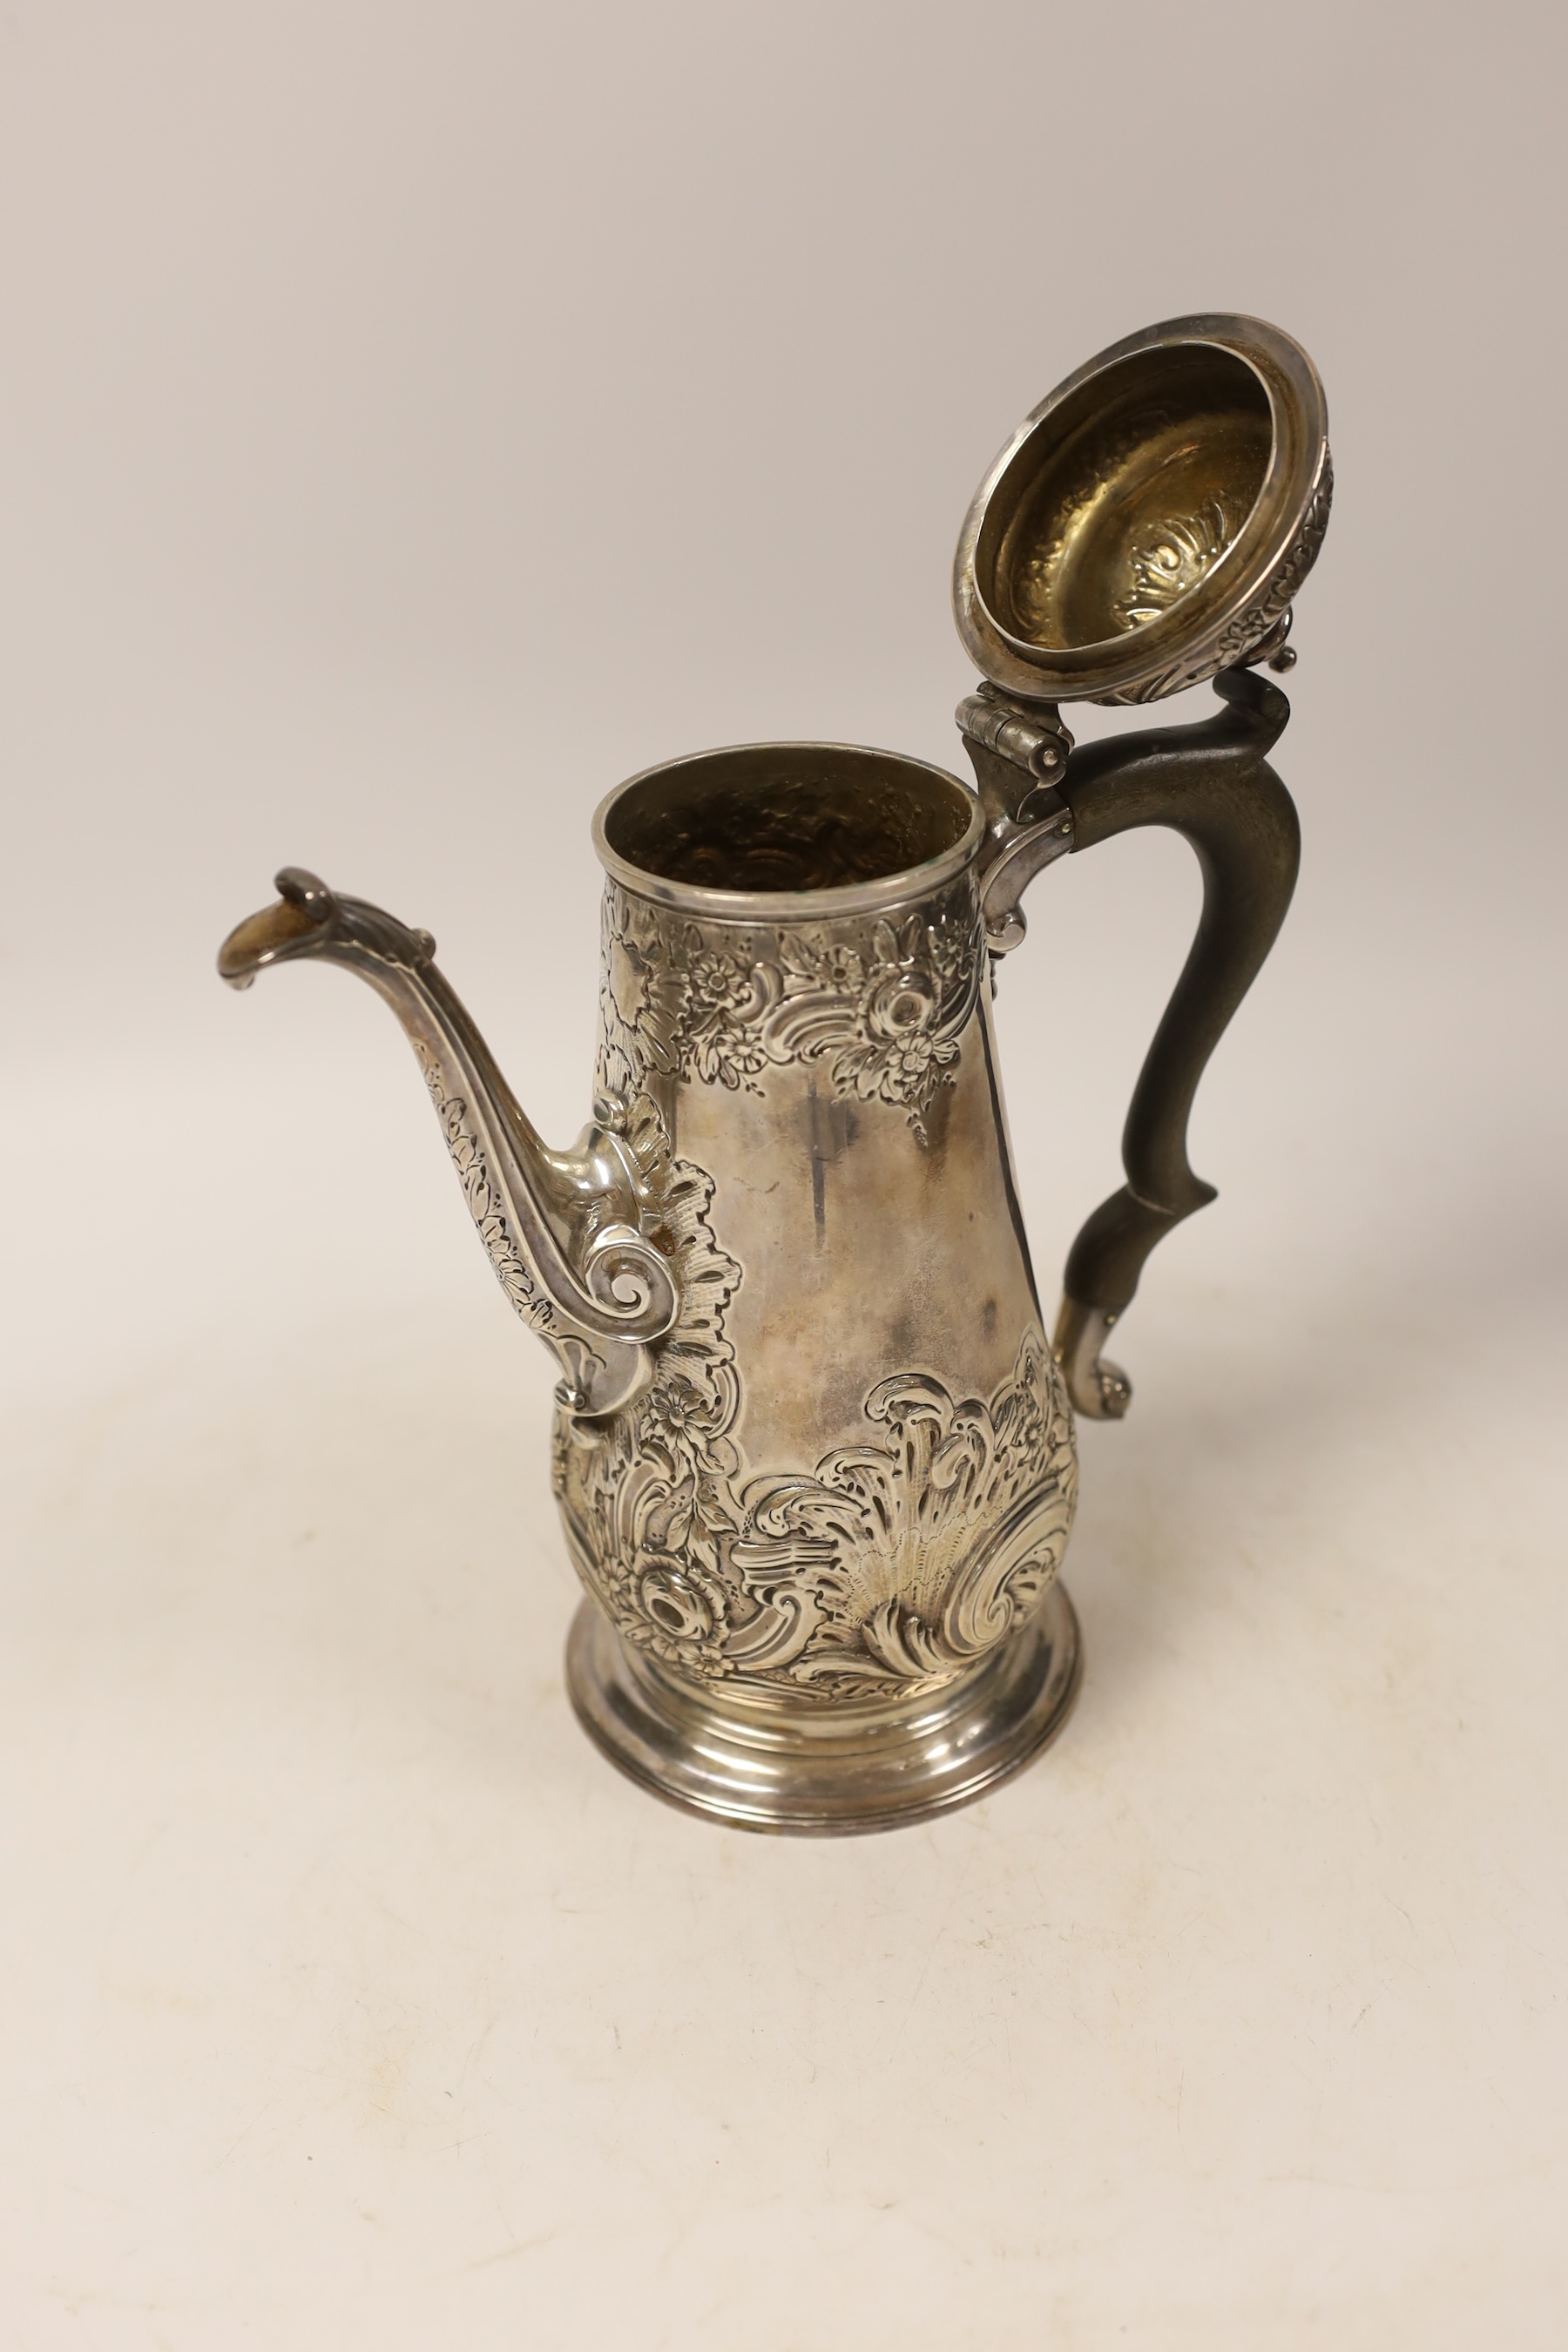 A George II silver coffee pot, with later embossed decoration, by Gurney & Cook, London, 1749m height 23.3cm, gross weight 22.2oz.